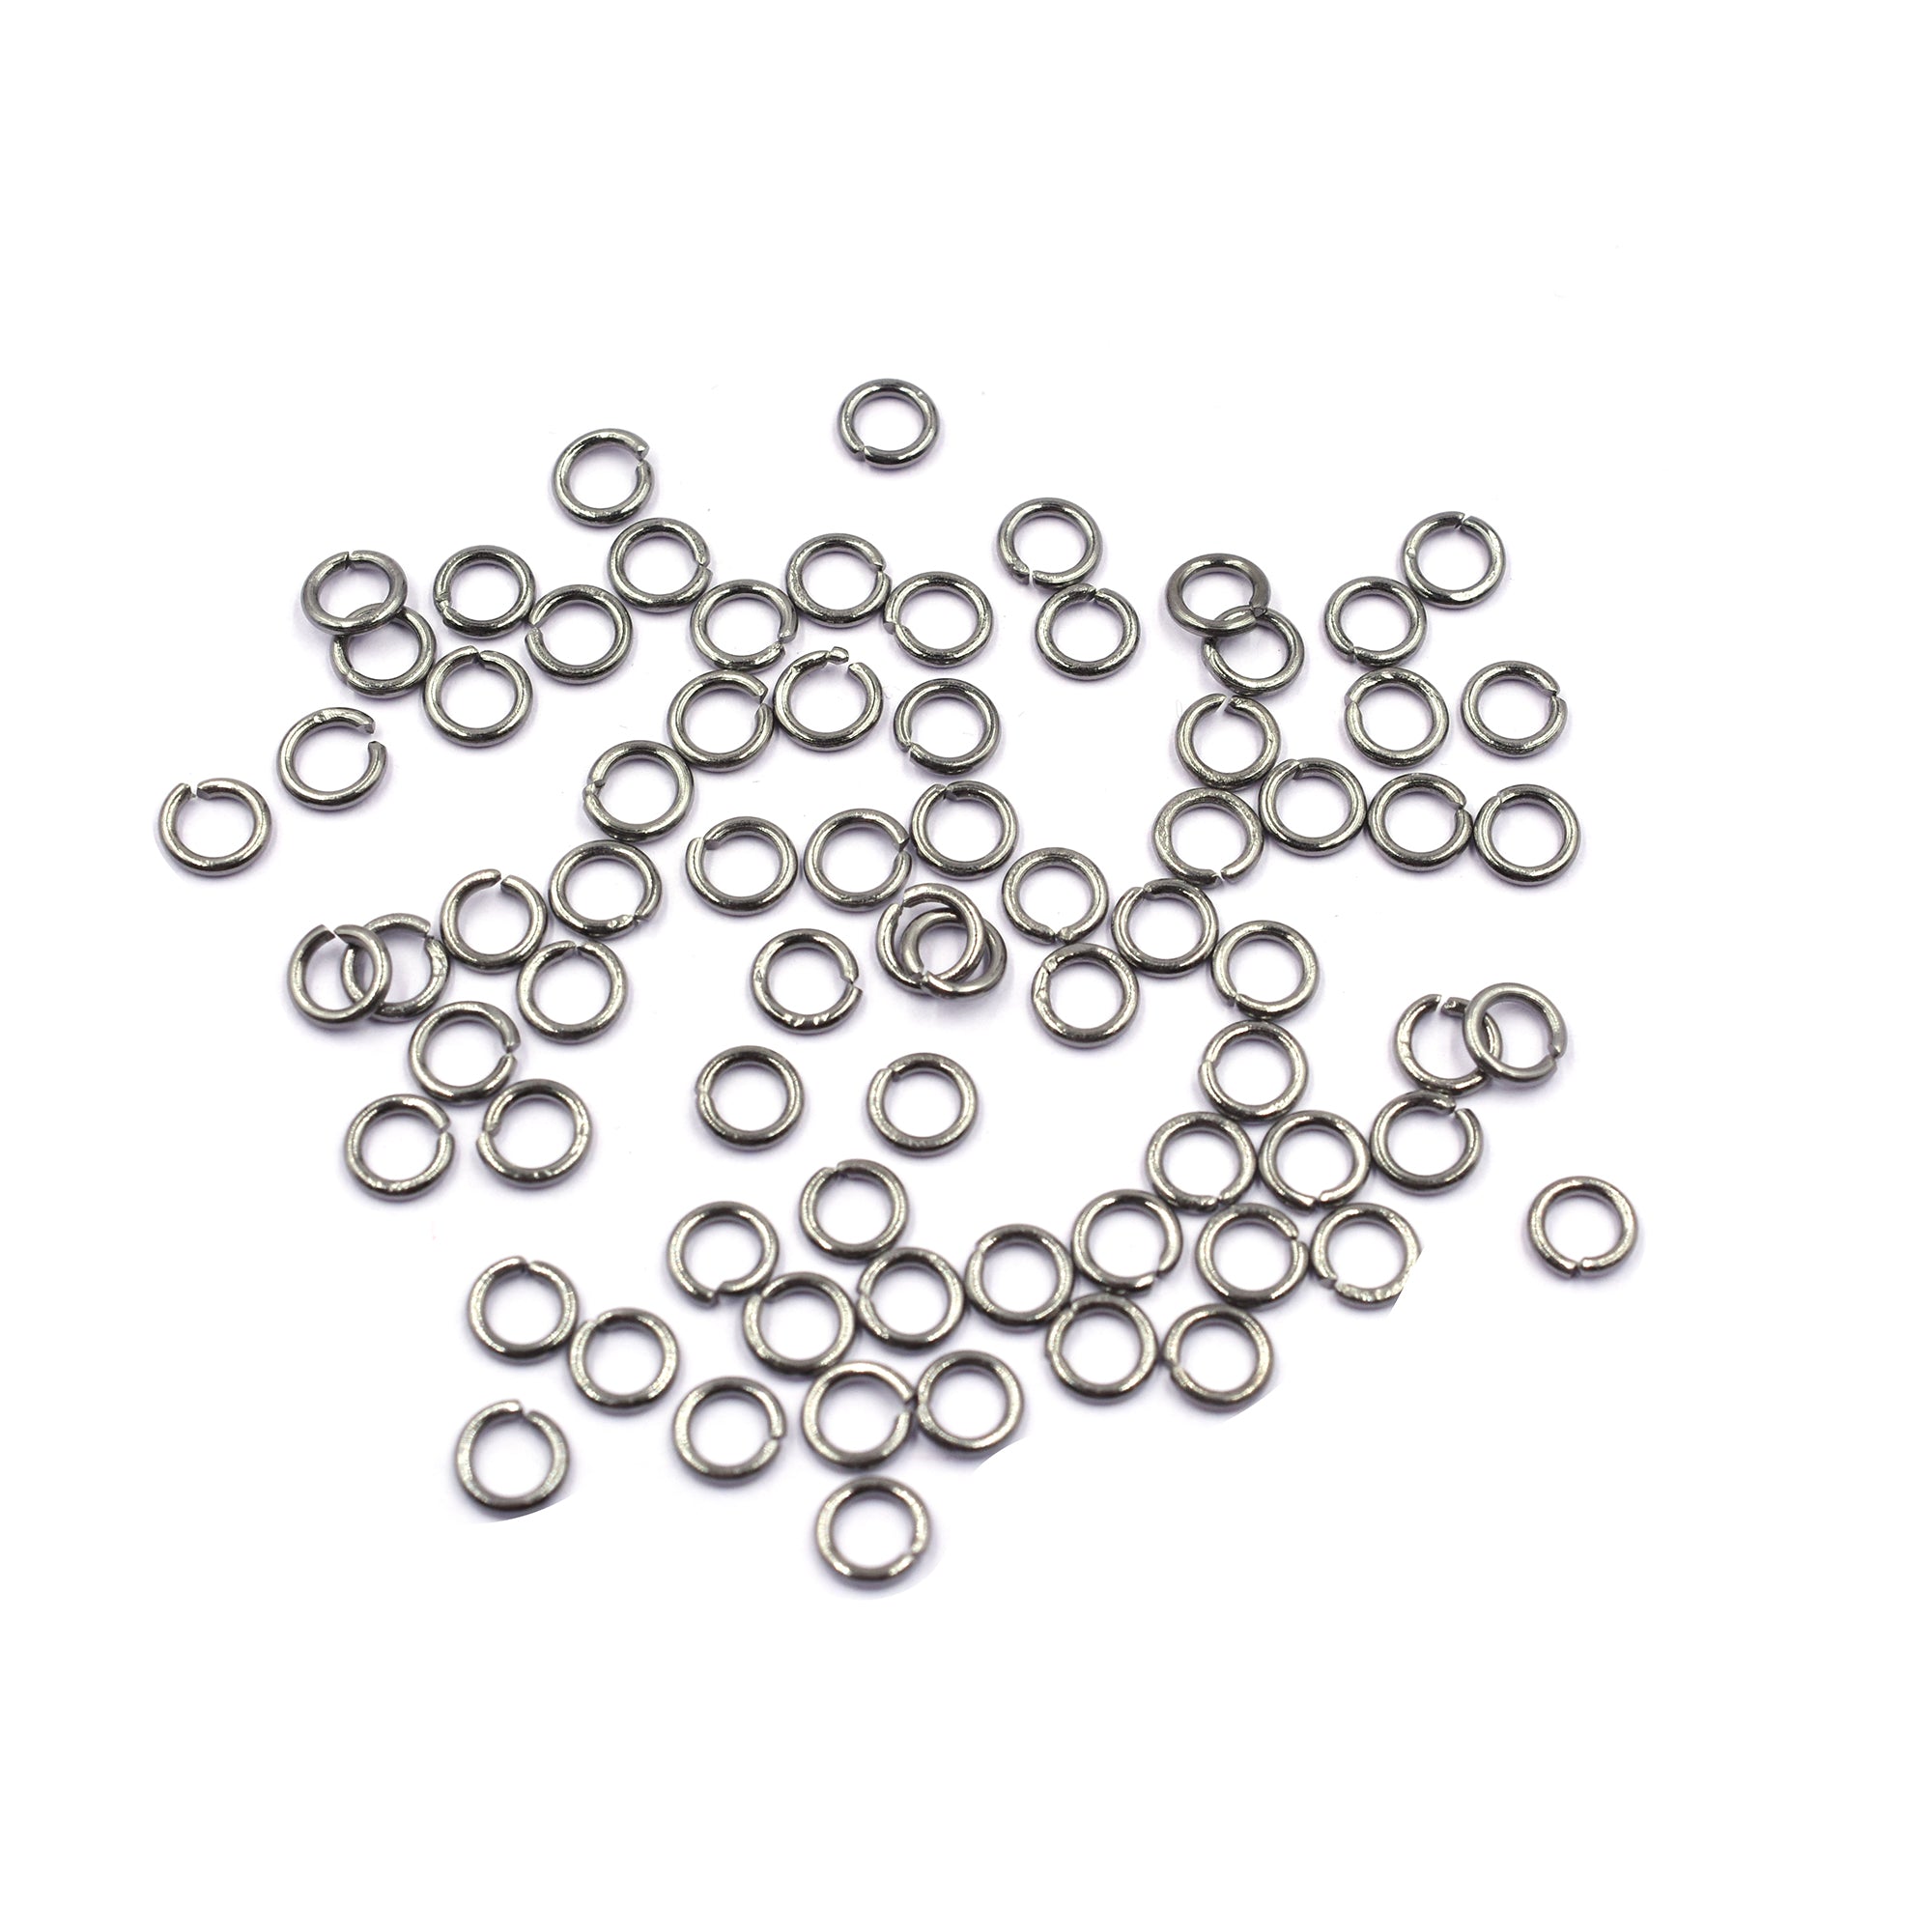 500 Pcs 6mm Open Jump Ring Black Finished Copper